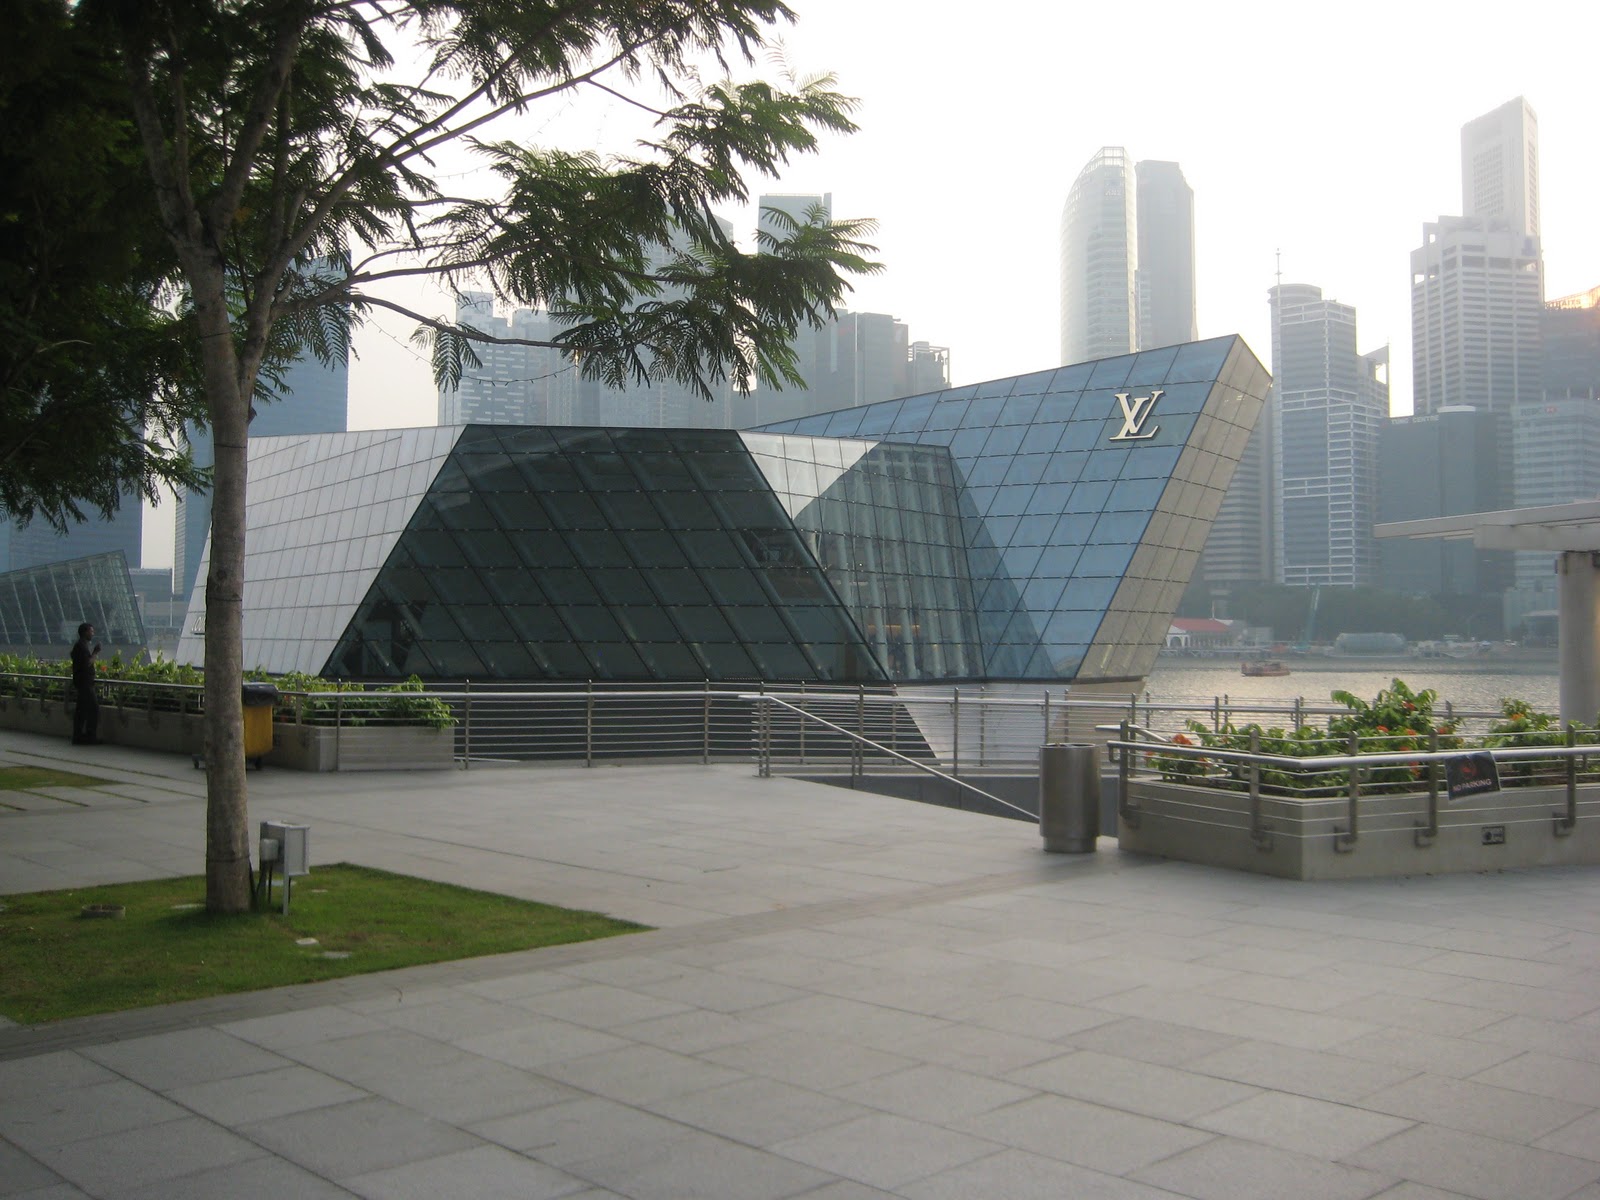 My First Little Place: LV Marina Bay Sands